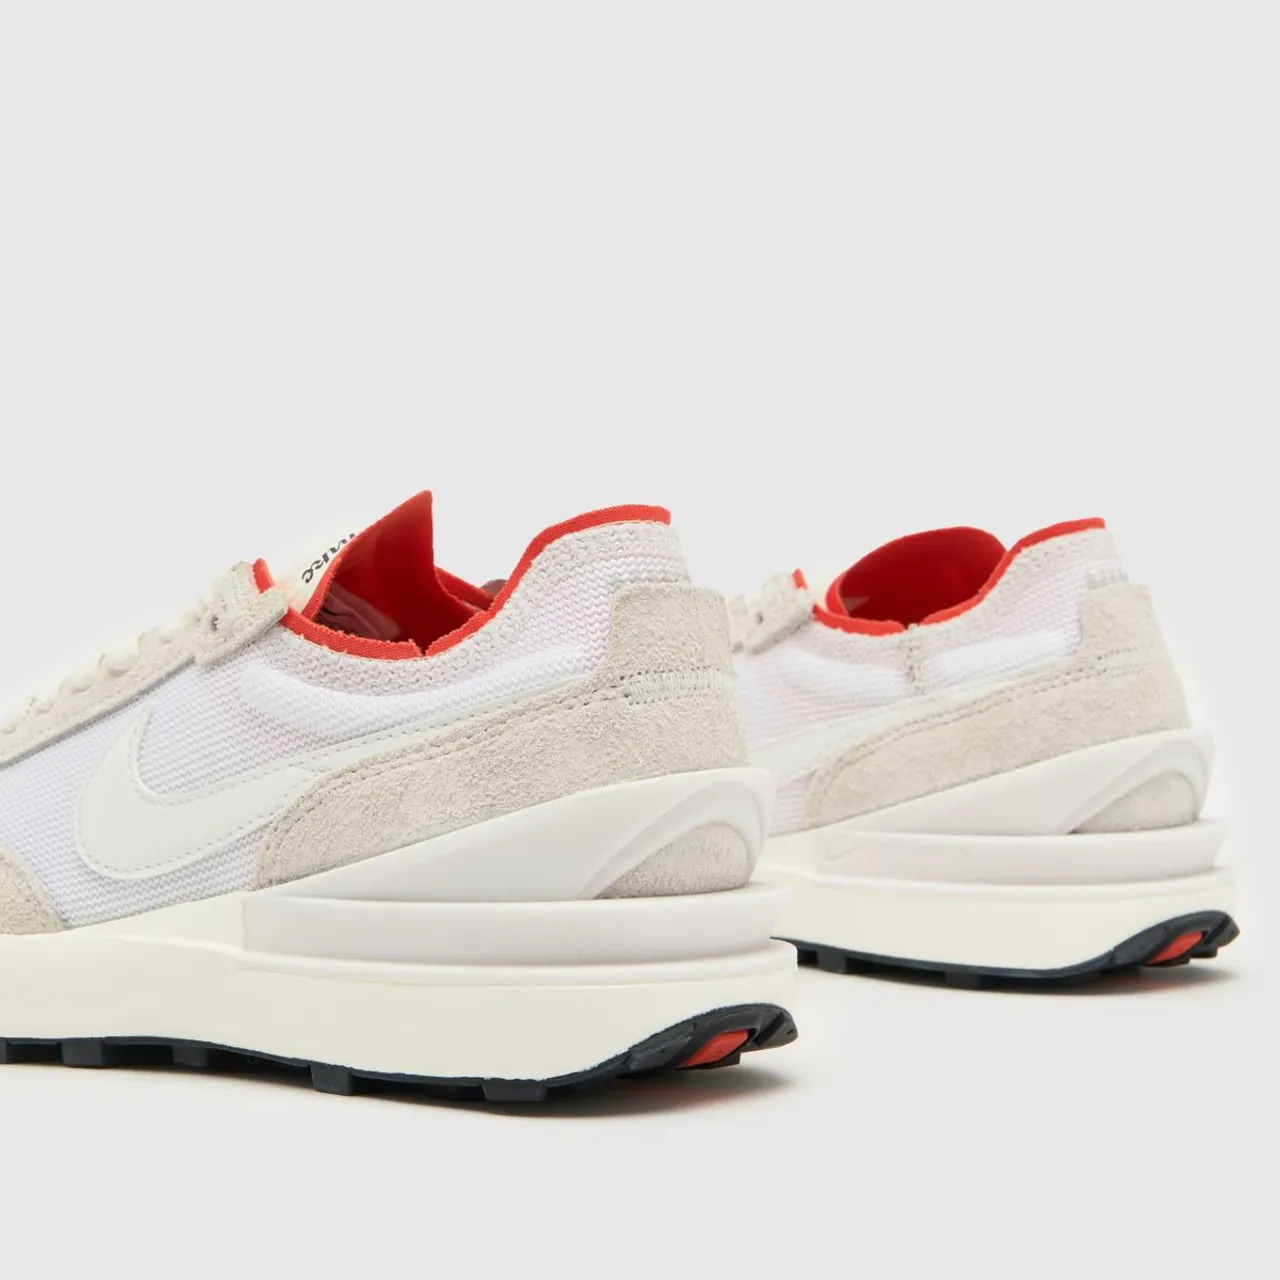 Nike Waffle One Vintage Trainers In White Multi